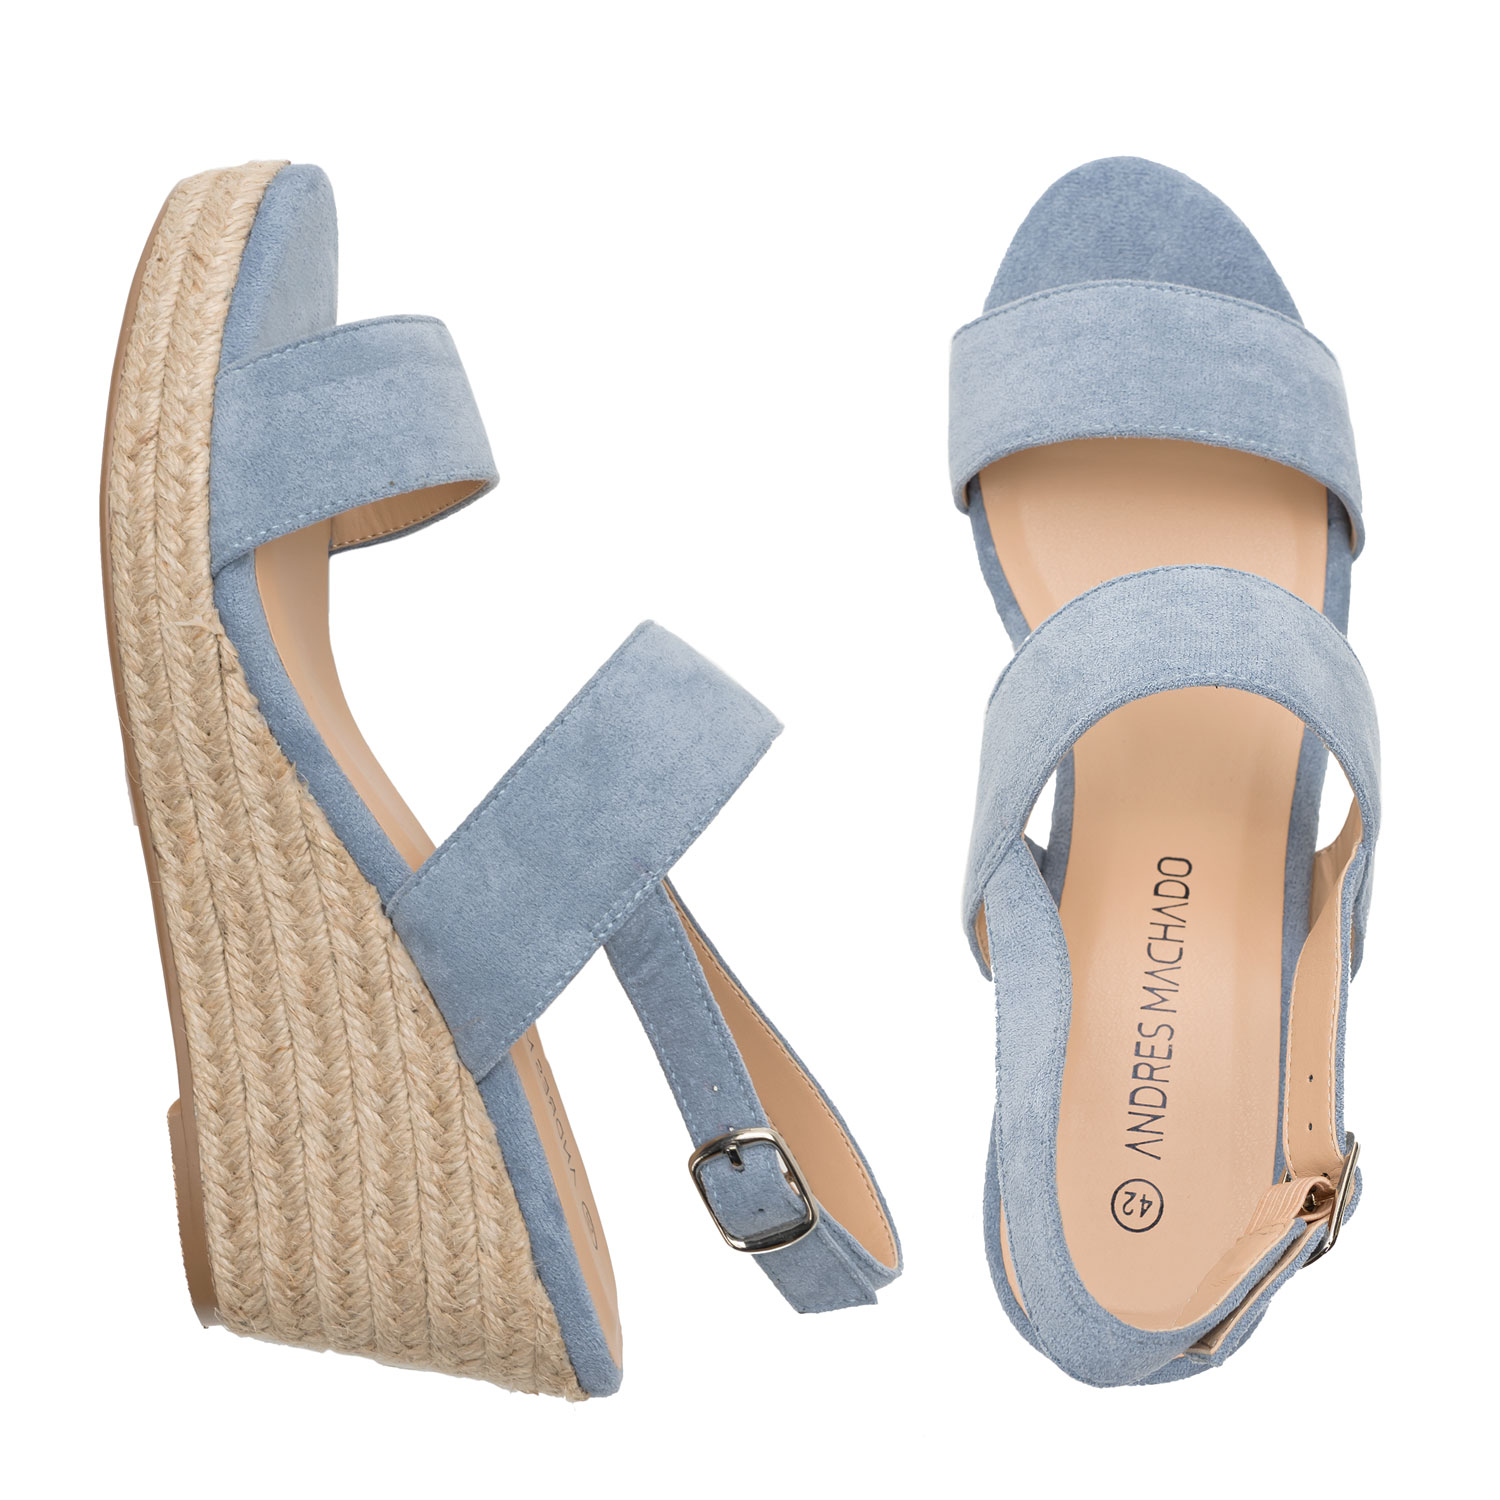 Light Blue Faux Suede Espadrille with Jute Wedge 